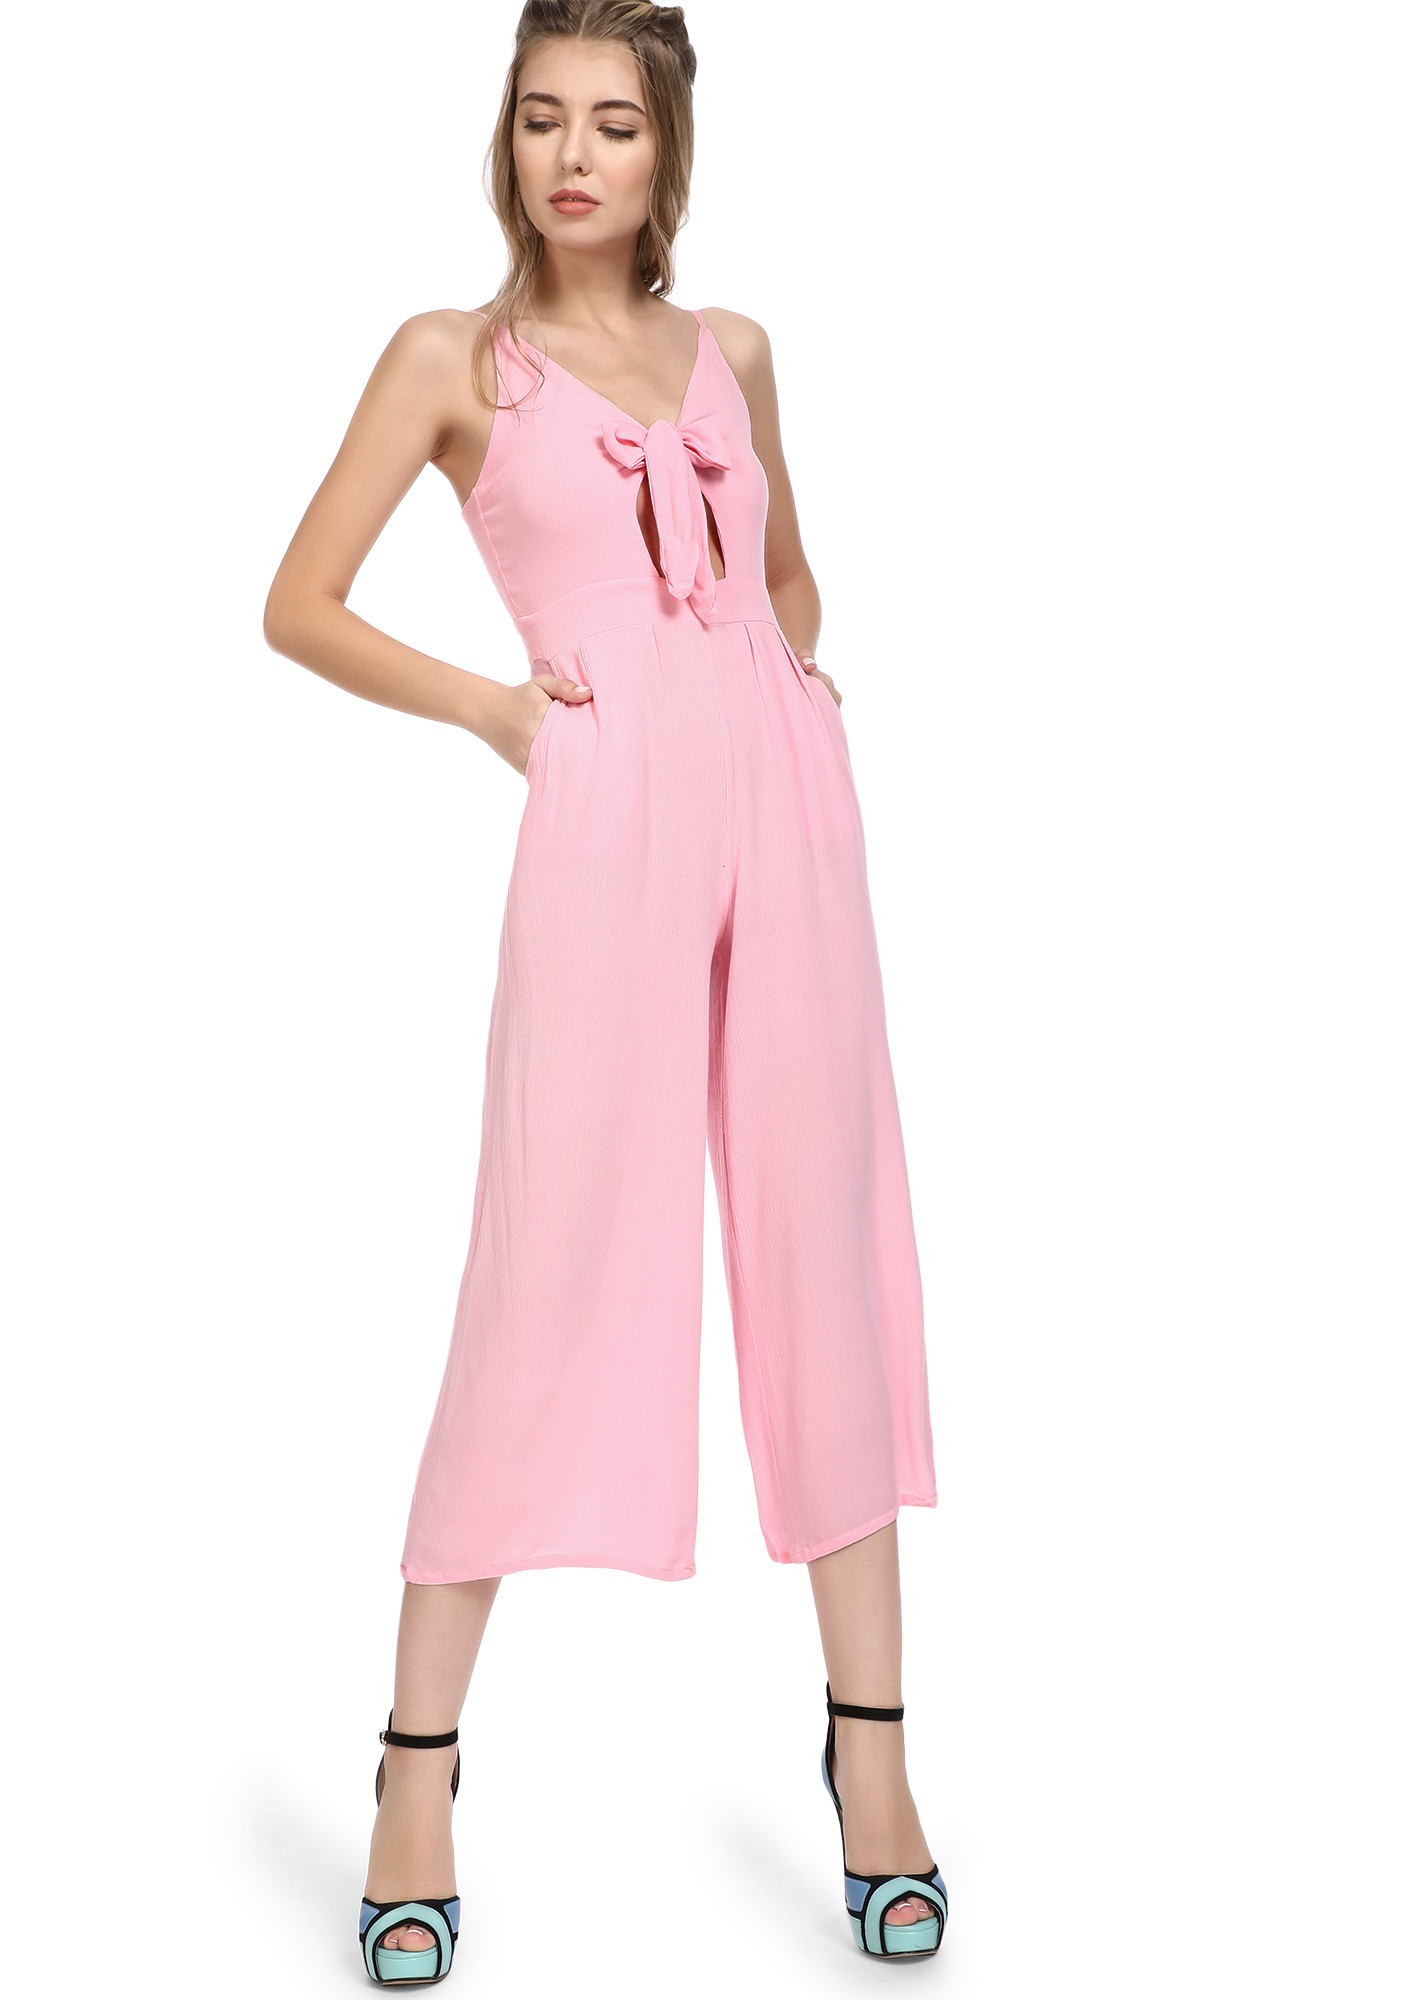 NO CHILLS HERE PINK JUMPSUITS 